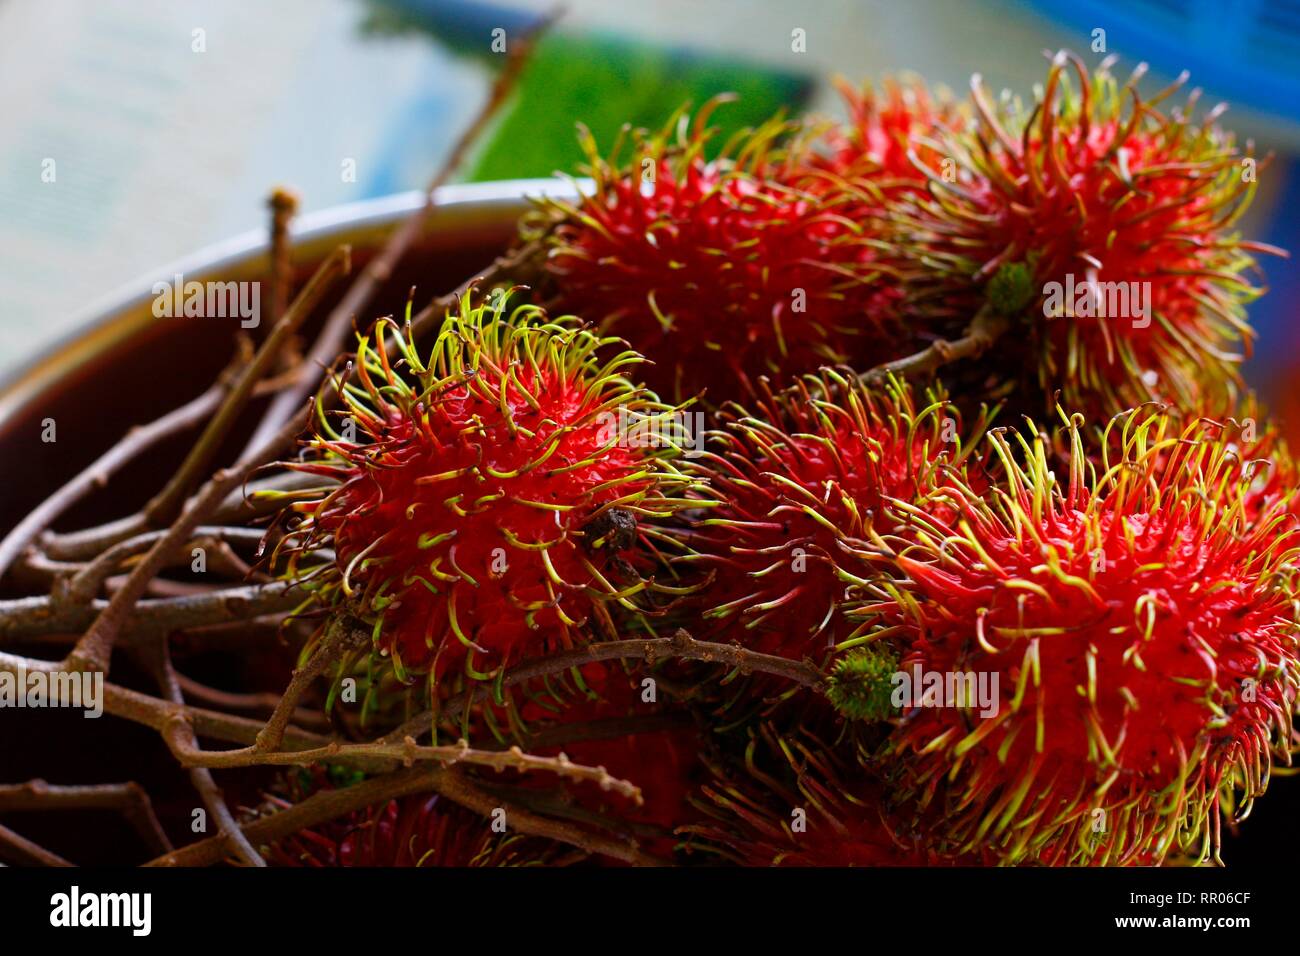 Bunch of fresh ramboutan, rouge et hairly fruits tropicaux Banque D'Images